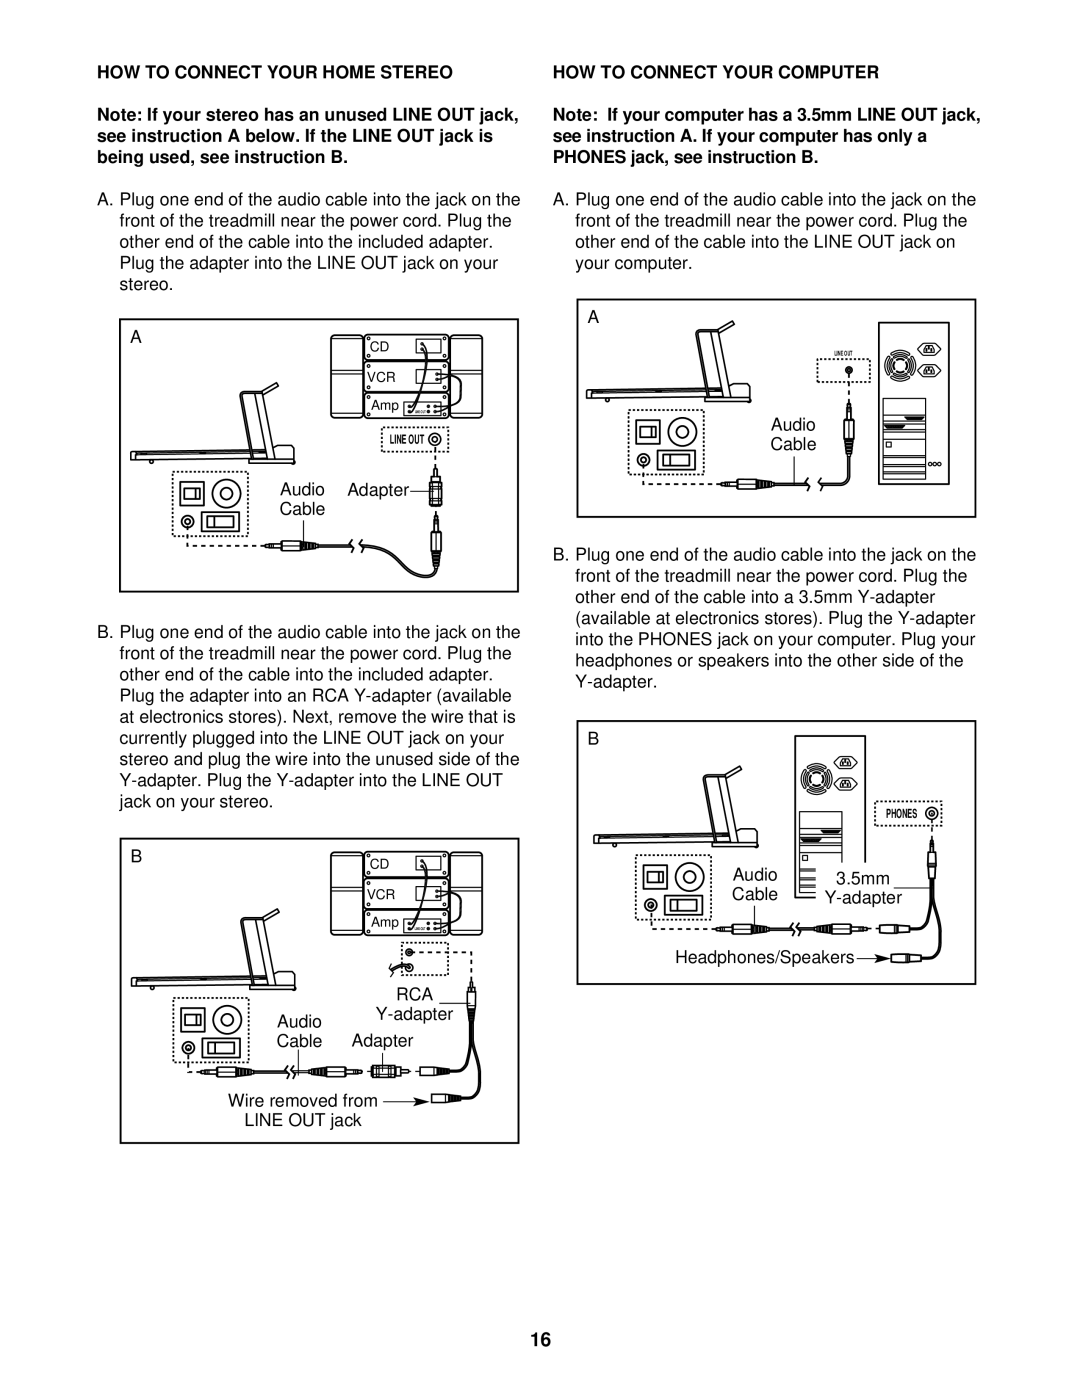 ProForm PFTL69213 user manual HOW to Connect Your Home Stereo, HOW to Connect Your Computer 